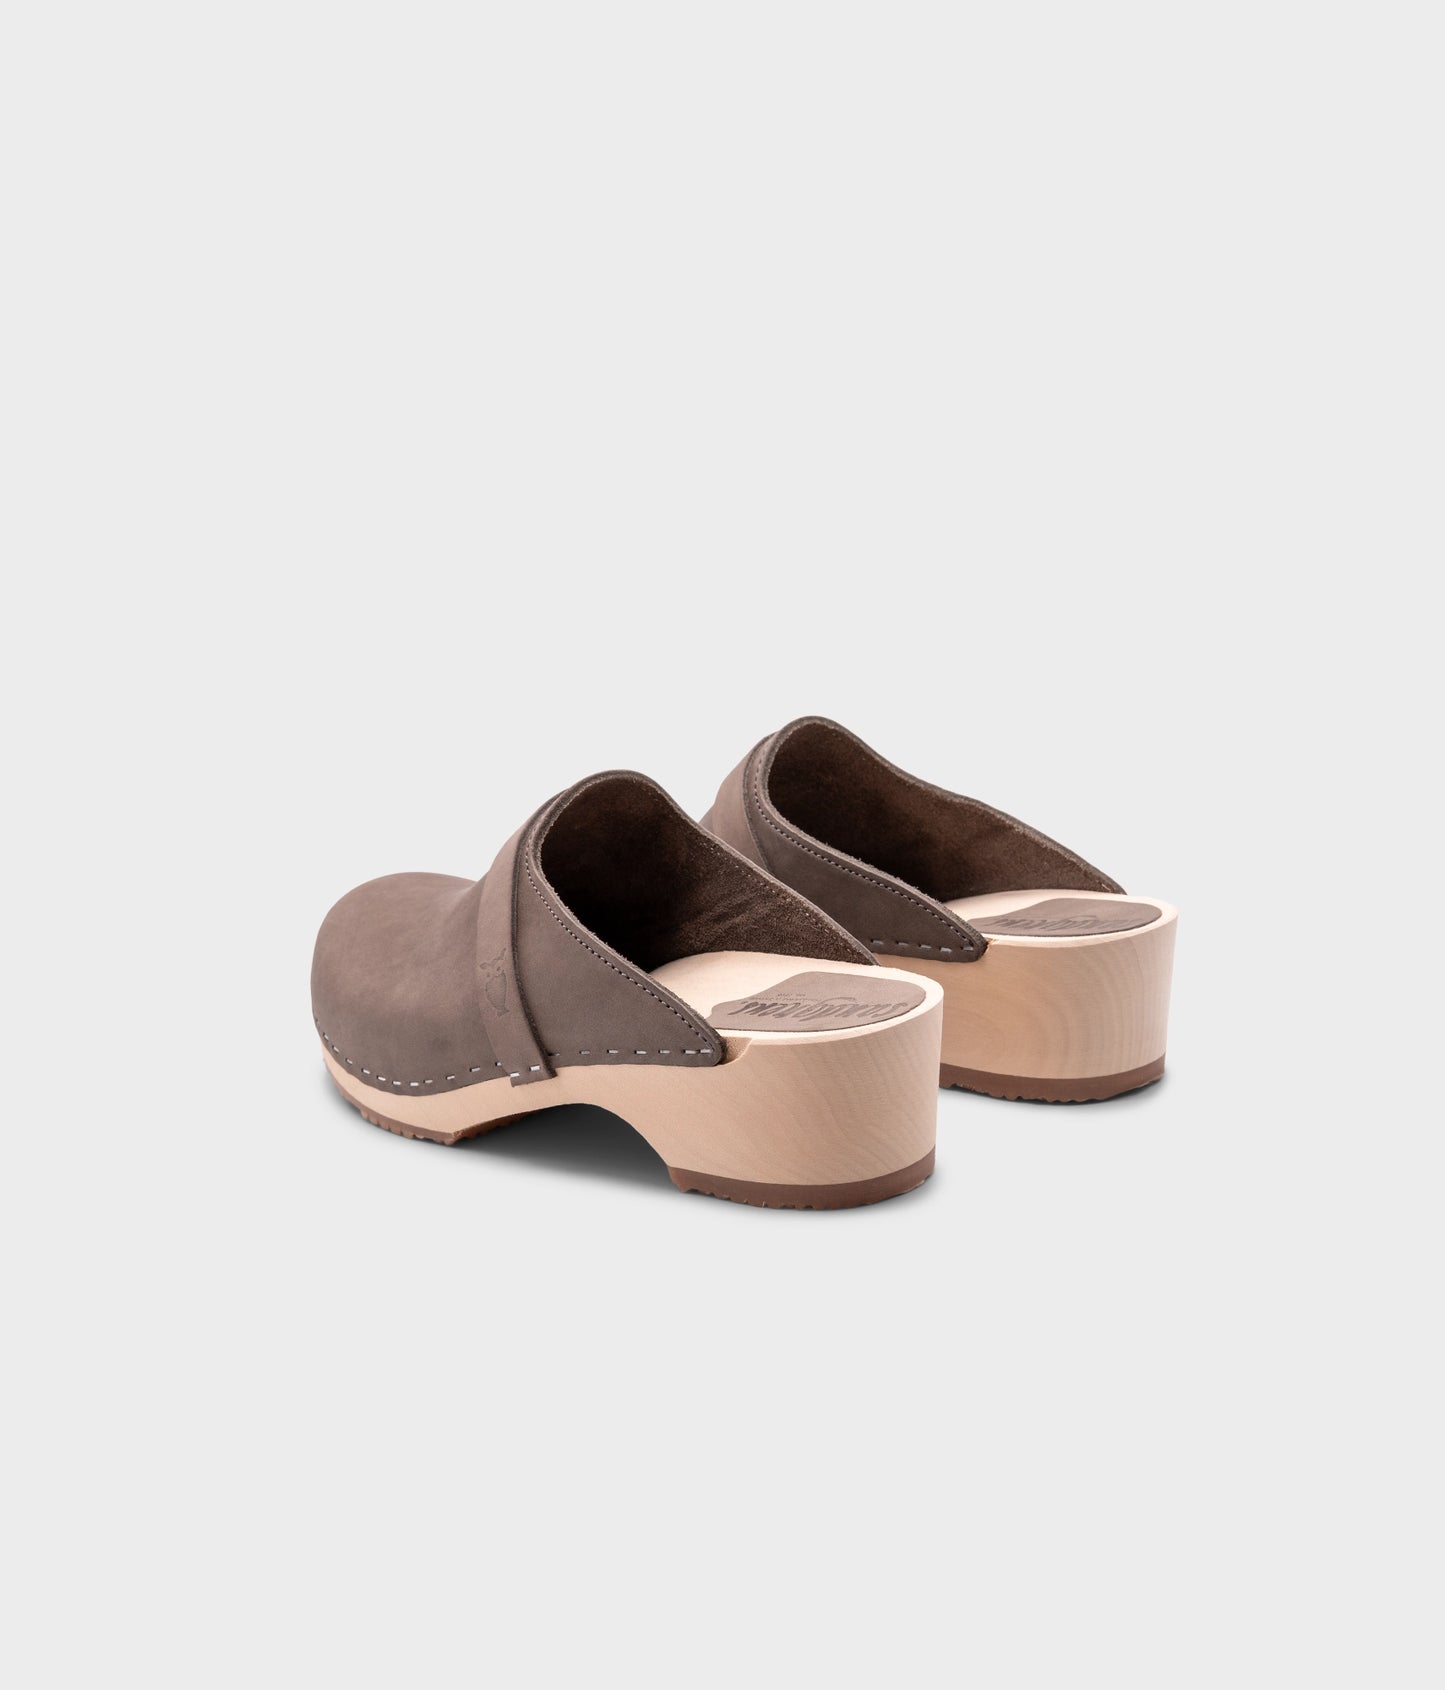 classic low heeled clog mule in stone grey nubuck leather stapled on a light wooden base with a leather strap